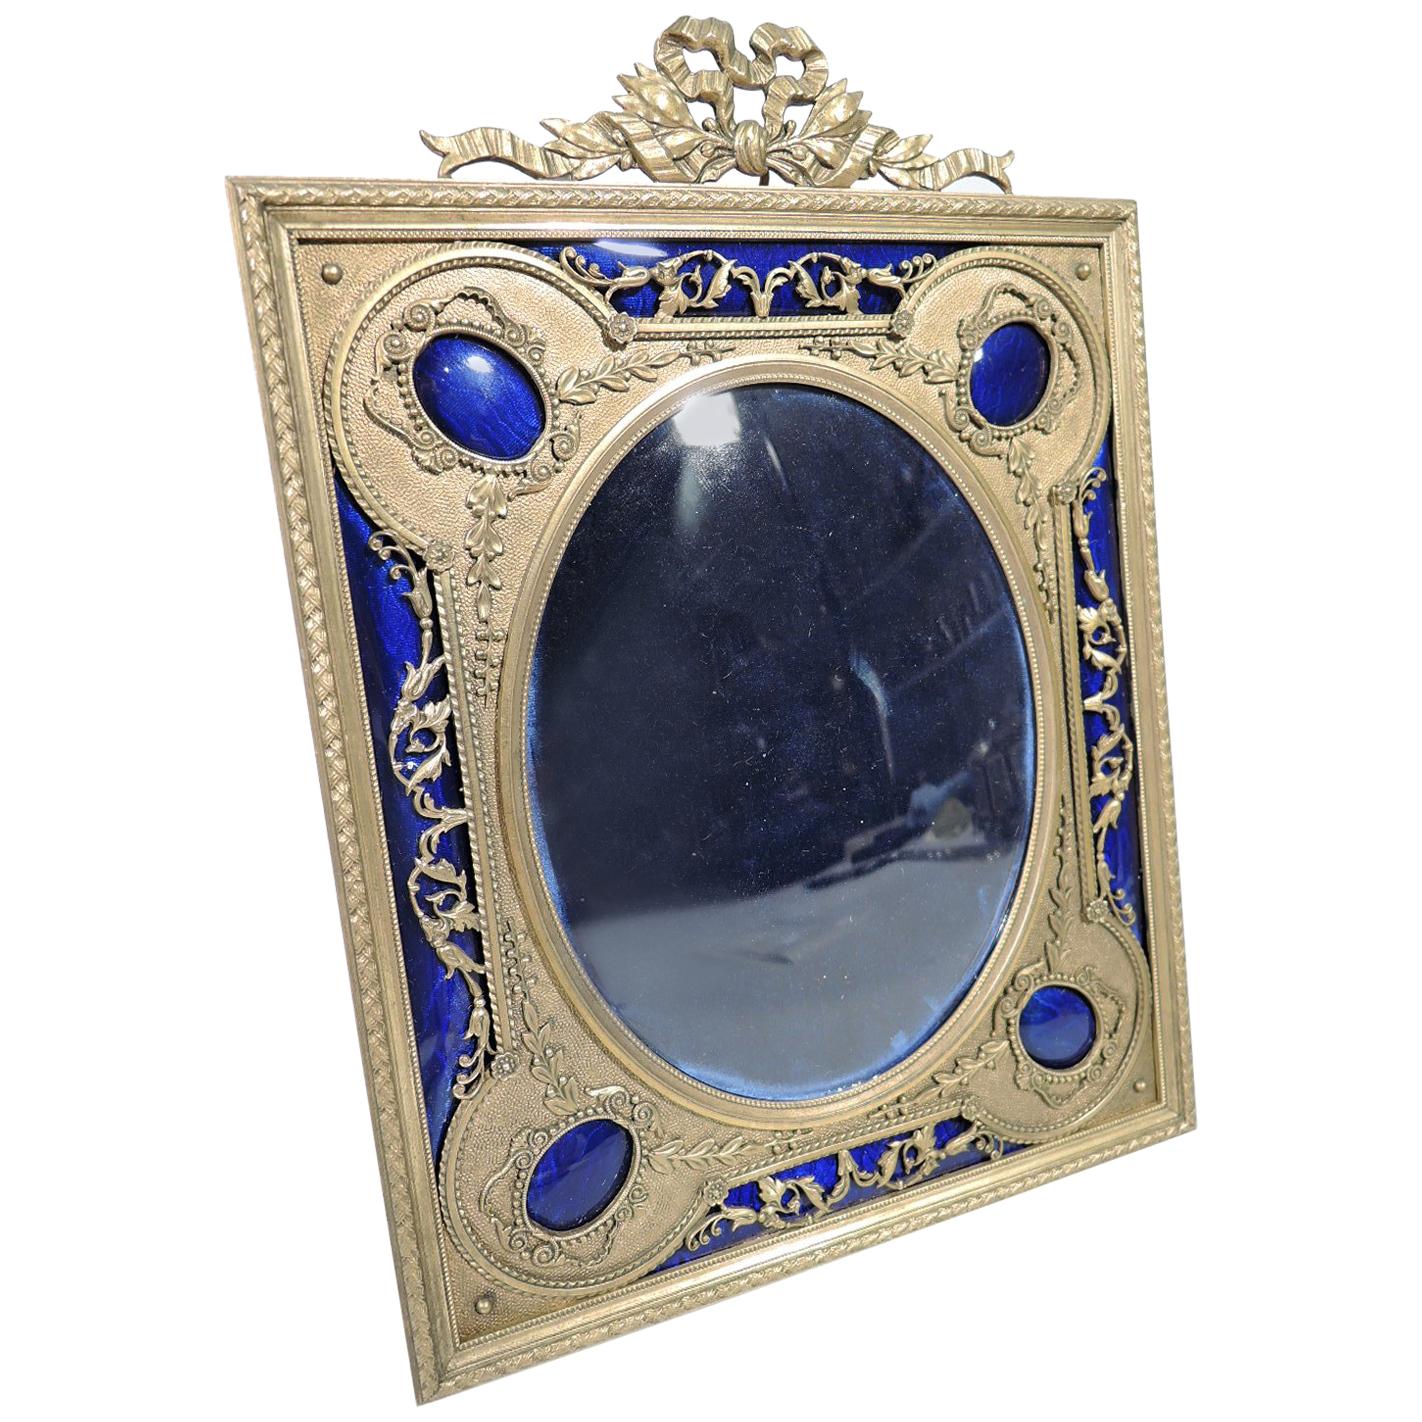 Antique French Rococo Gilt Bronze and Cobalt Enamel Picture Frame